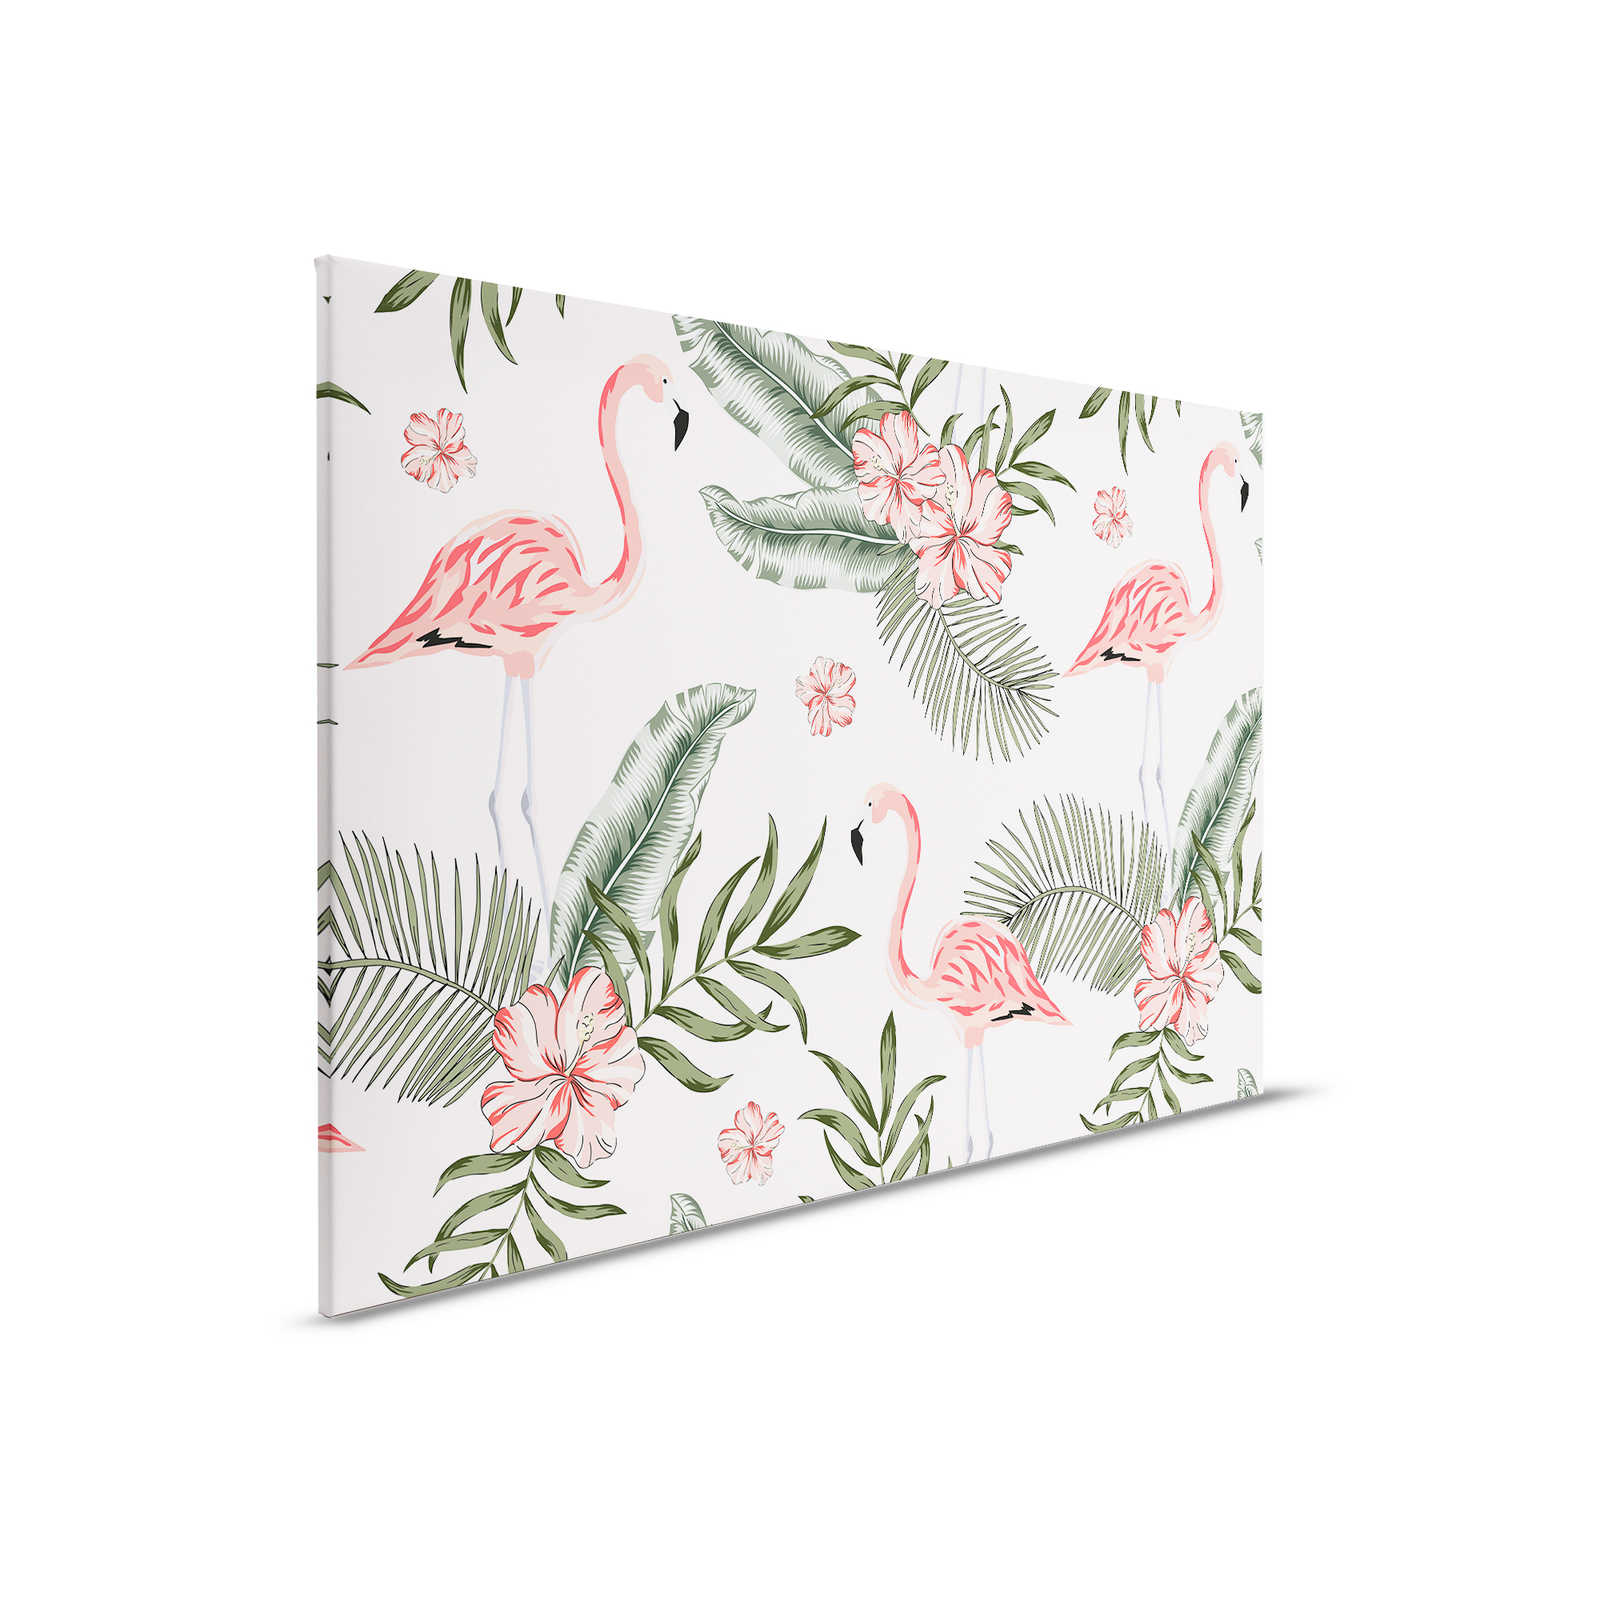         Canvas with flamingos and tropical plants - 0.90 m x 0.60 m
    